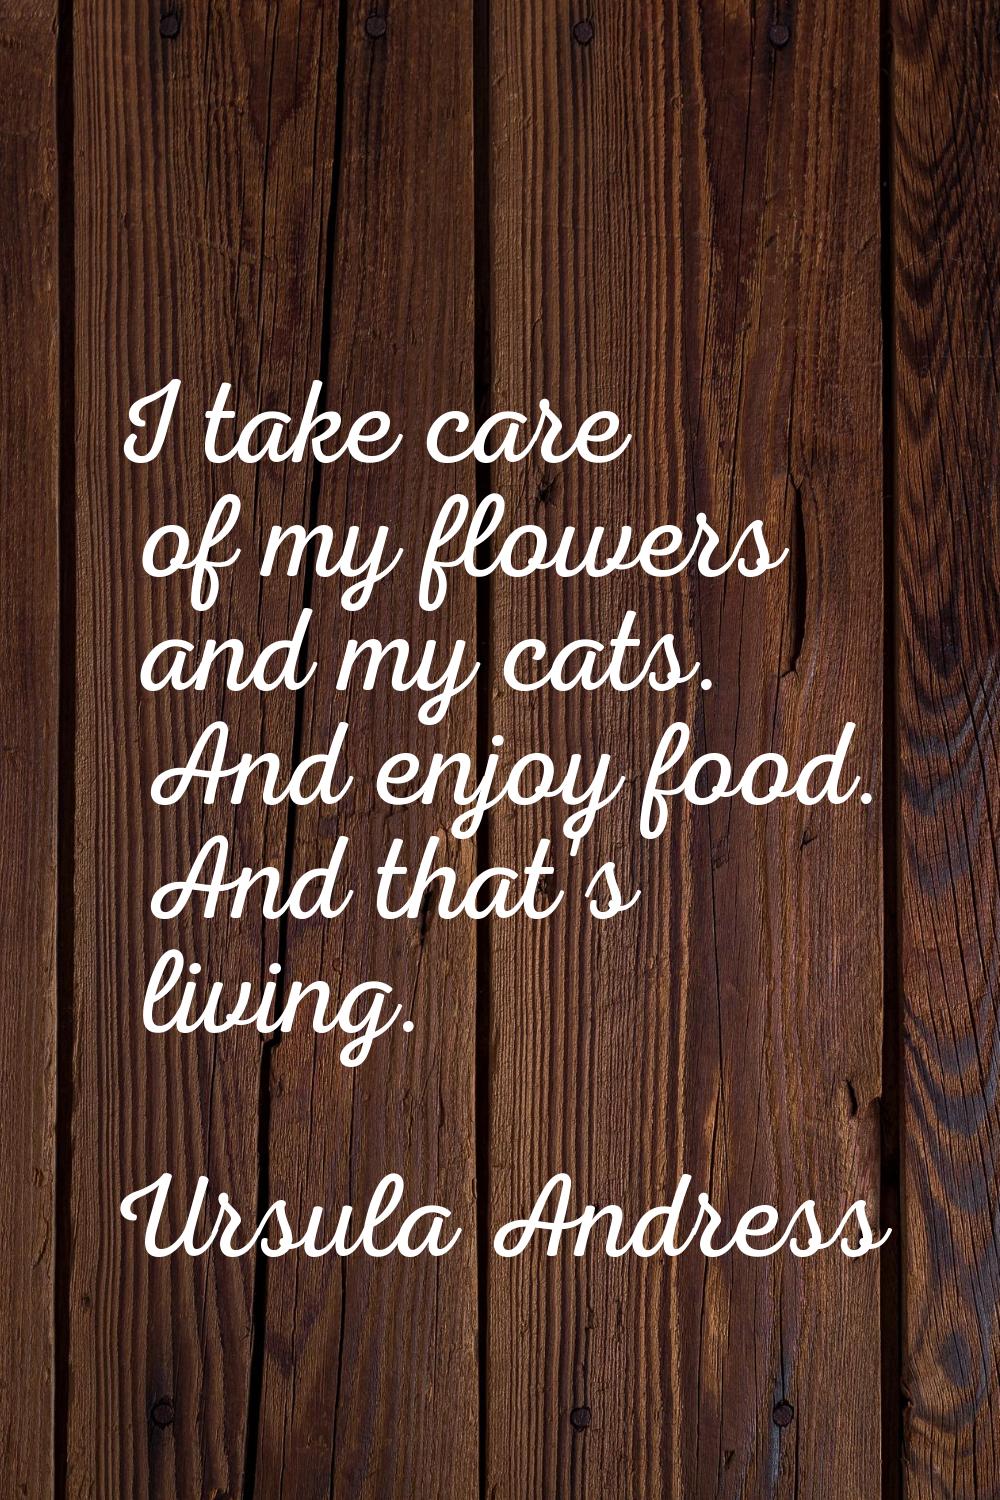 I take care of my flowers and my cats. And enjoy food. And that's living.